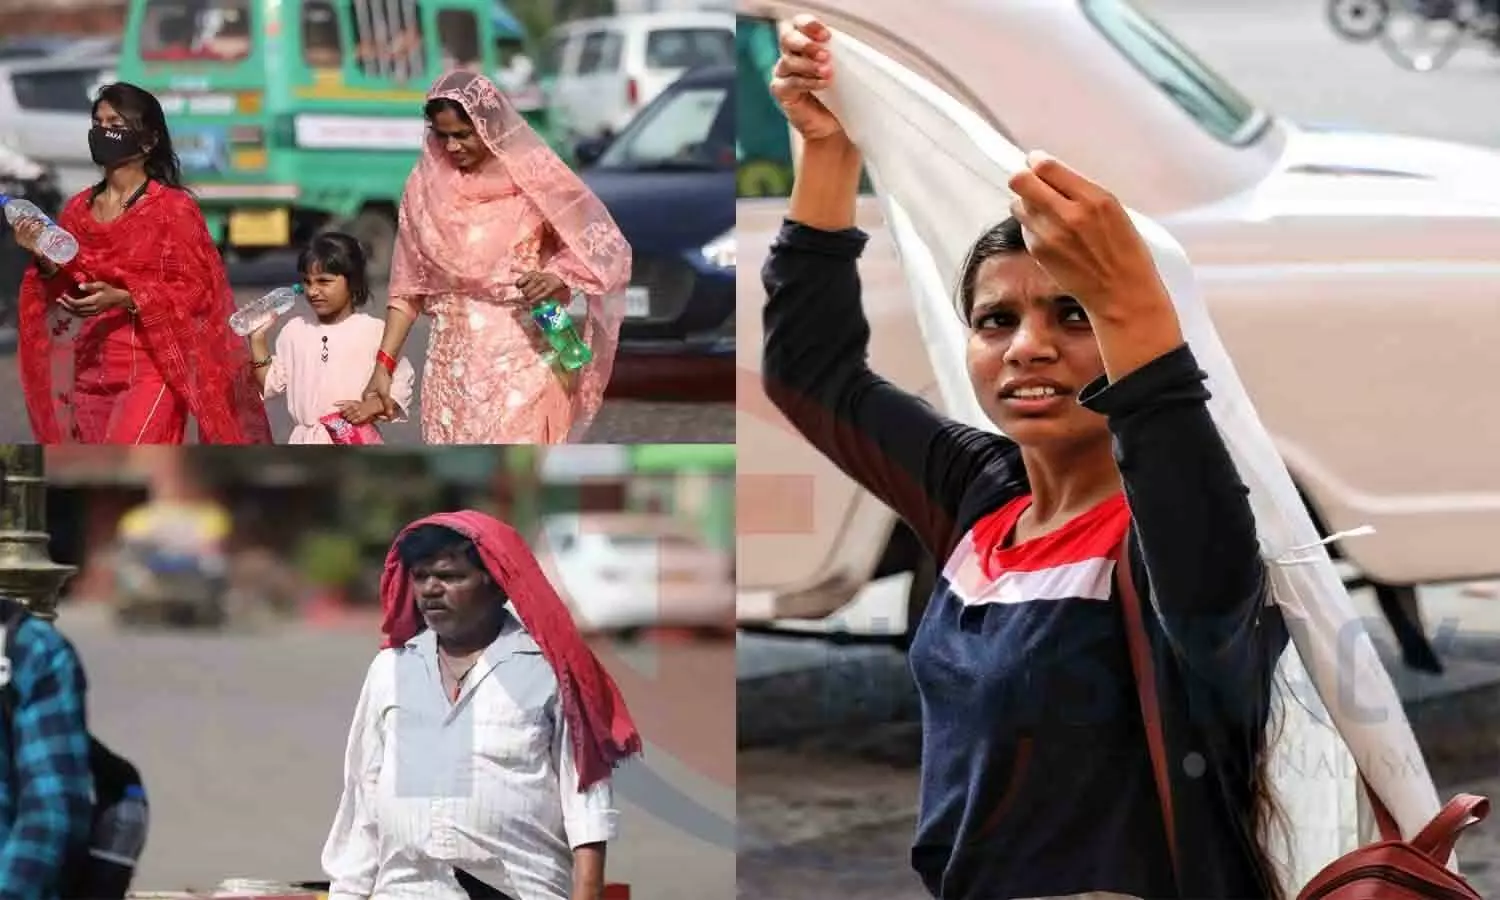 Capitals mercury rises: Lucknow was troubled by scorching sun, water and ice cream gave relief